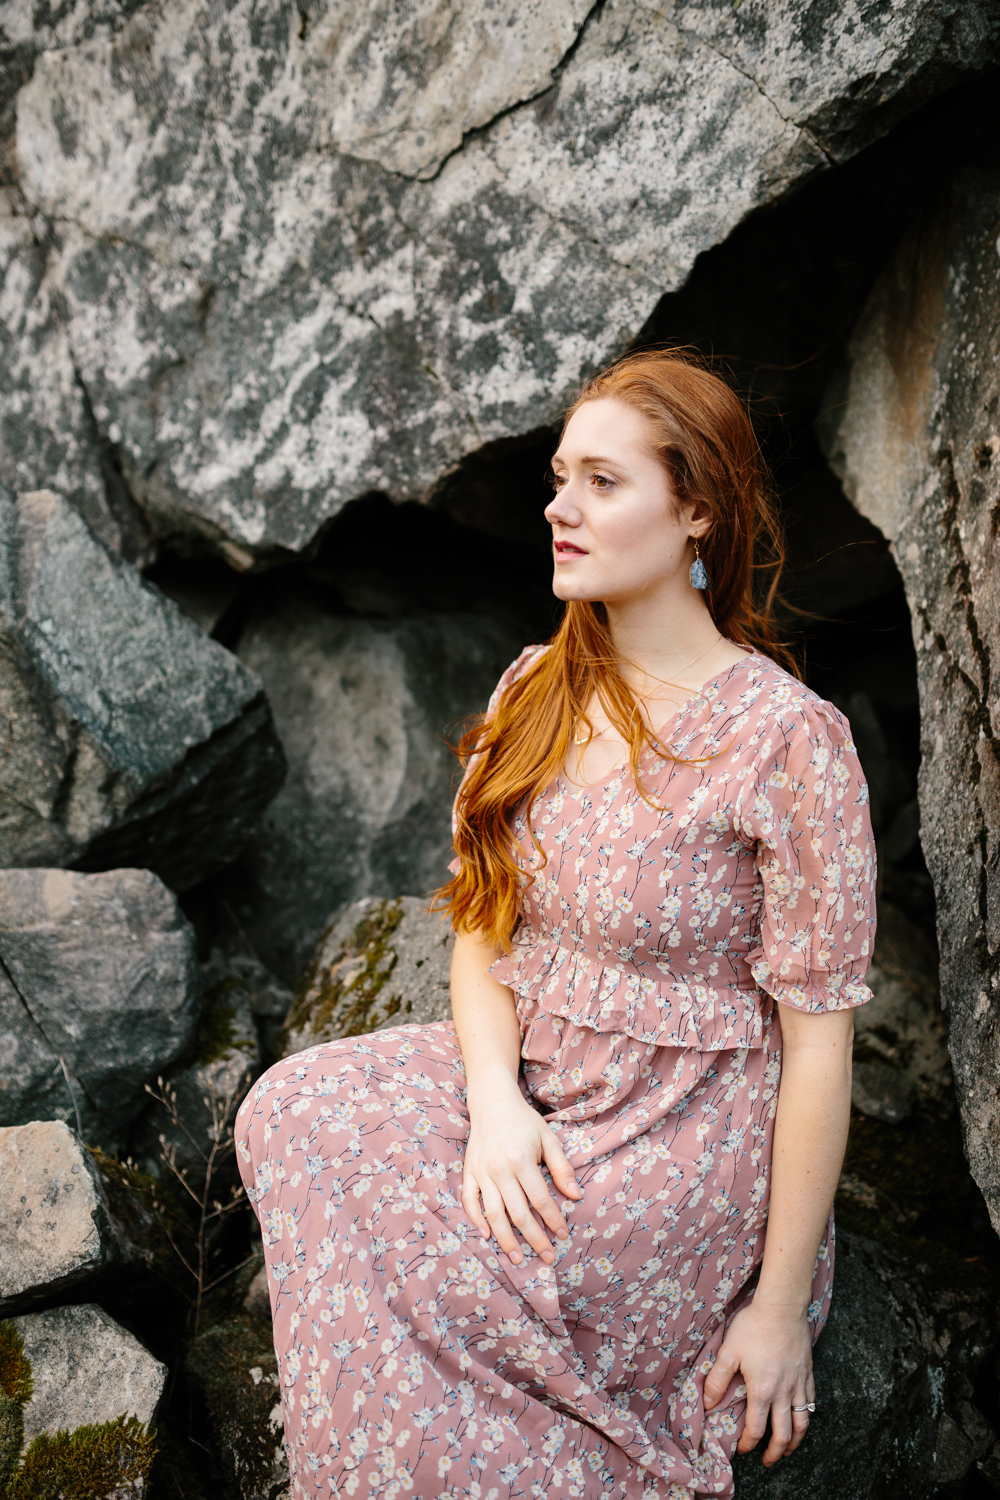 A Portrait of a Beautiful, Red-Haired Woman Sitting Amidst Bould